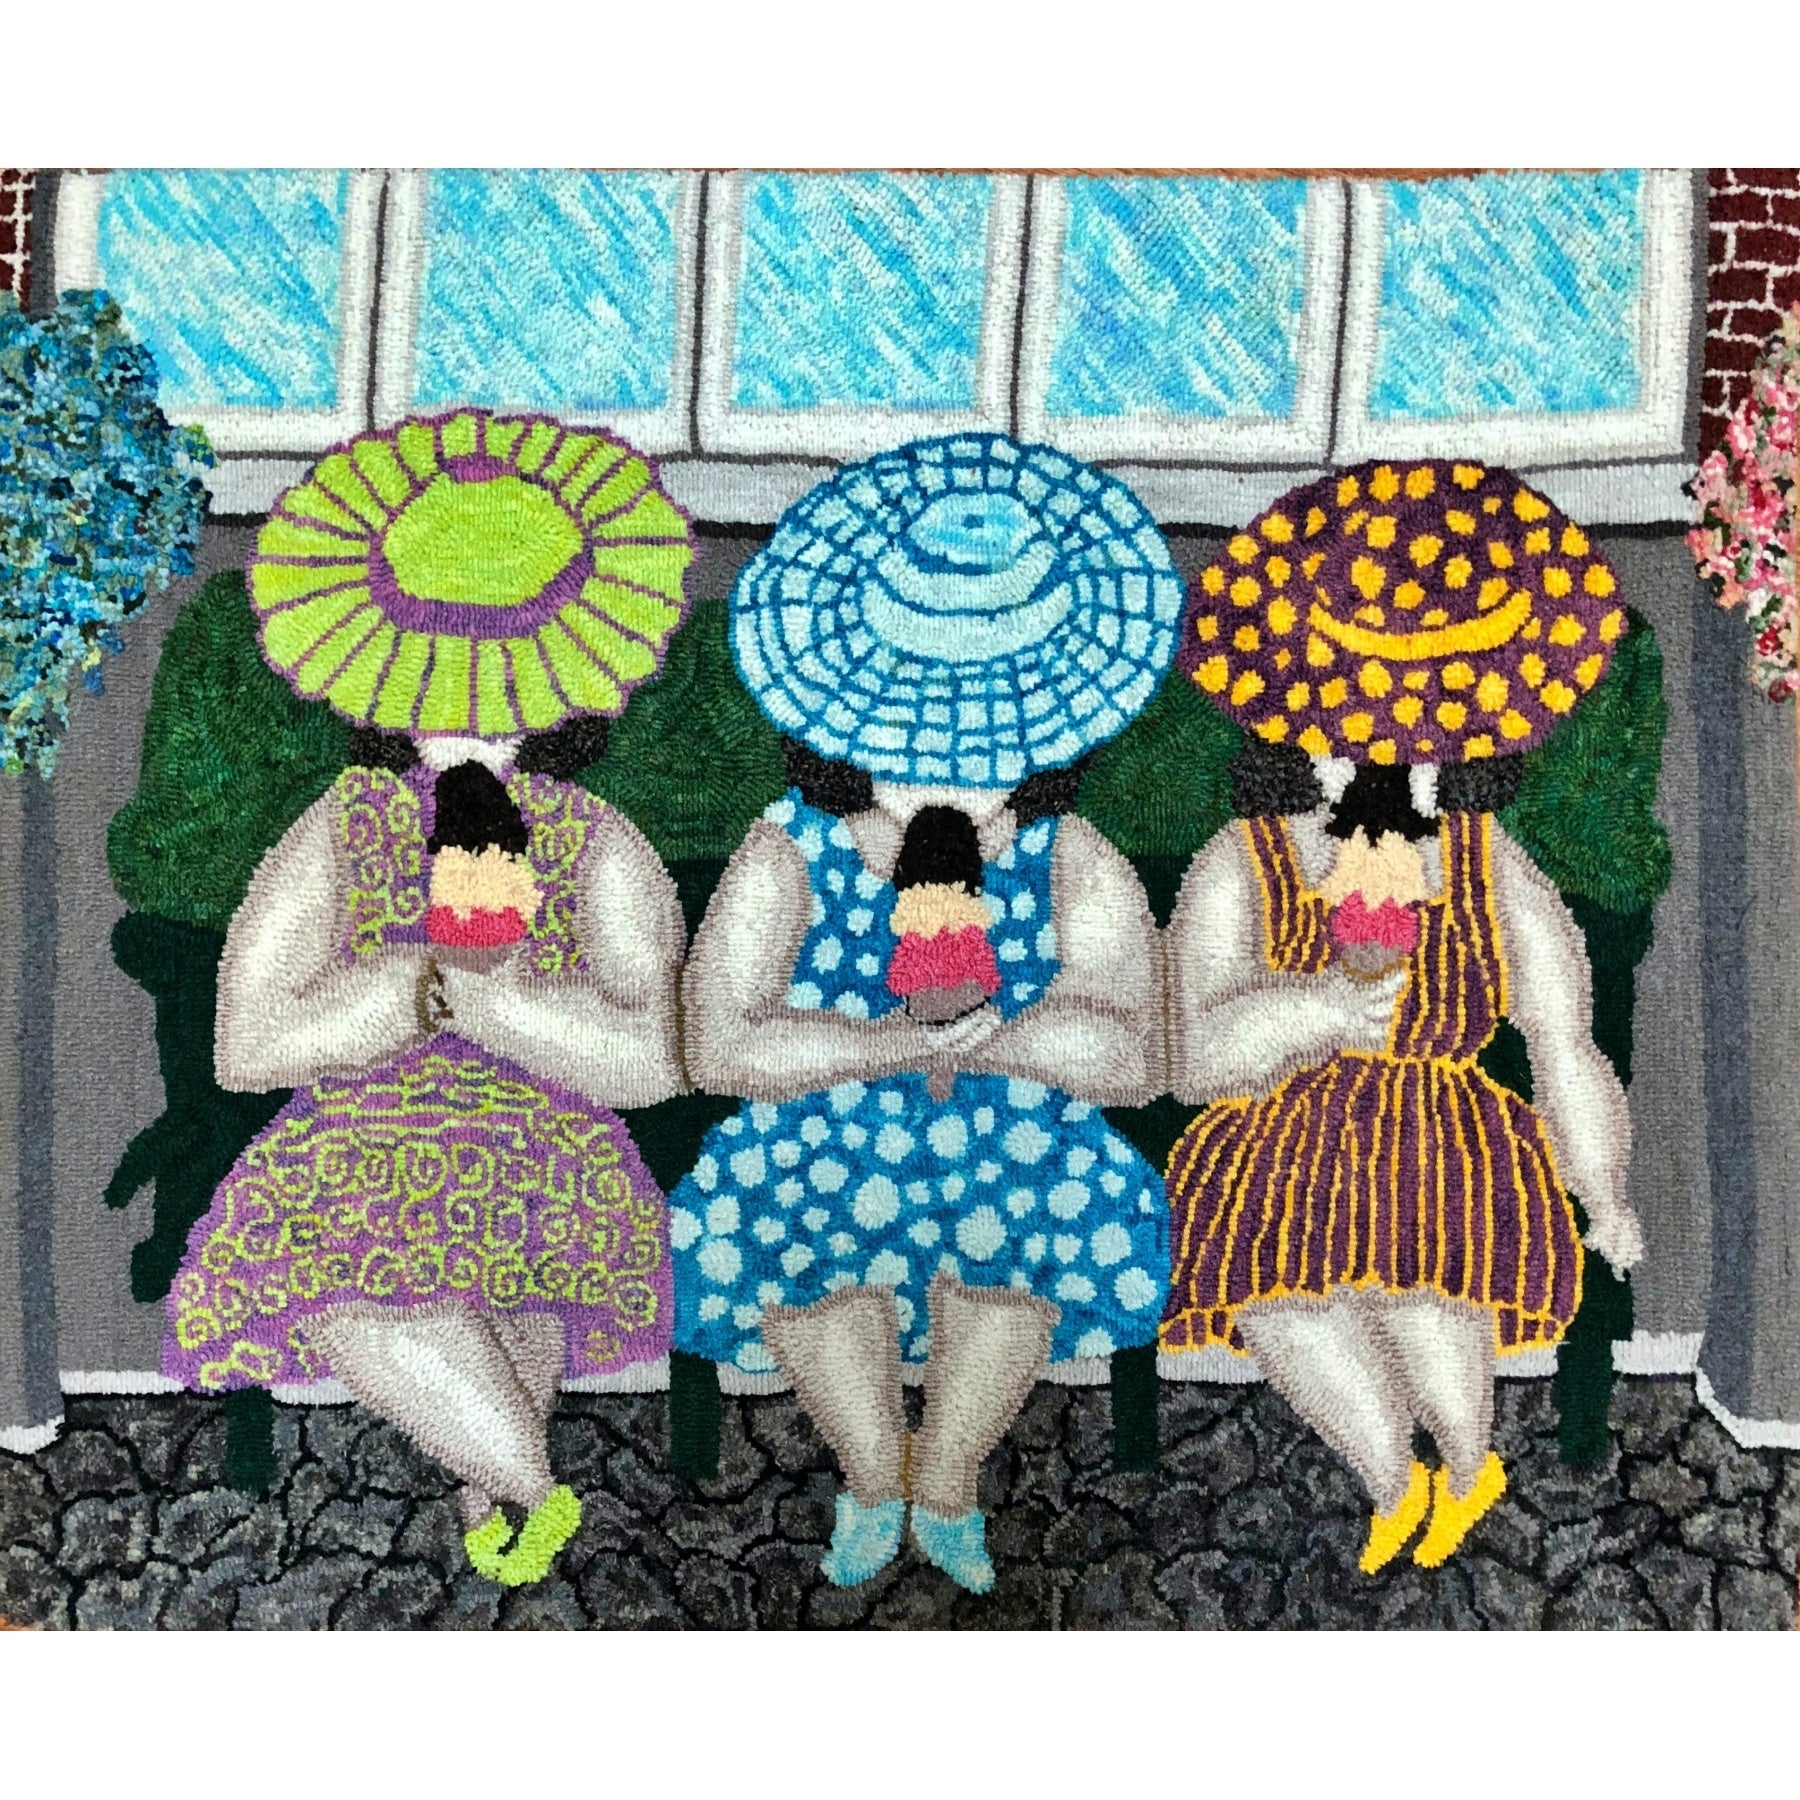 The Girls Doing Ice Cream, rug hooked by Carol Lachance